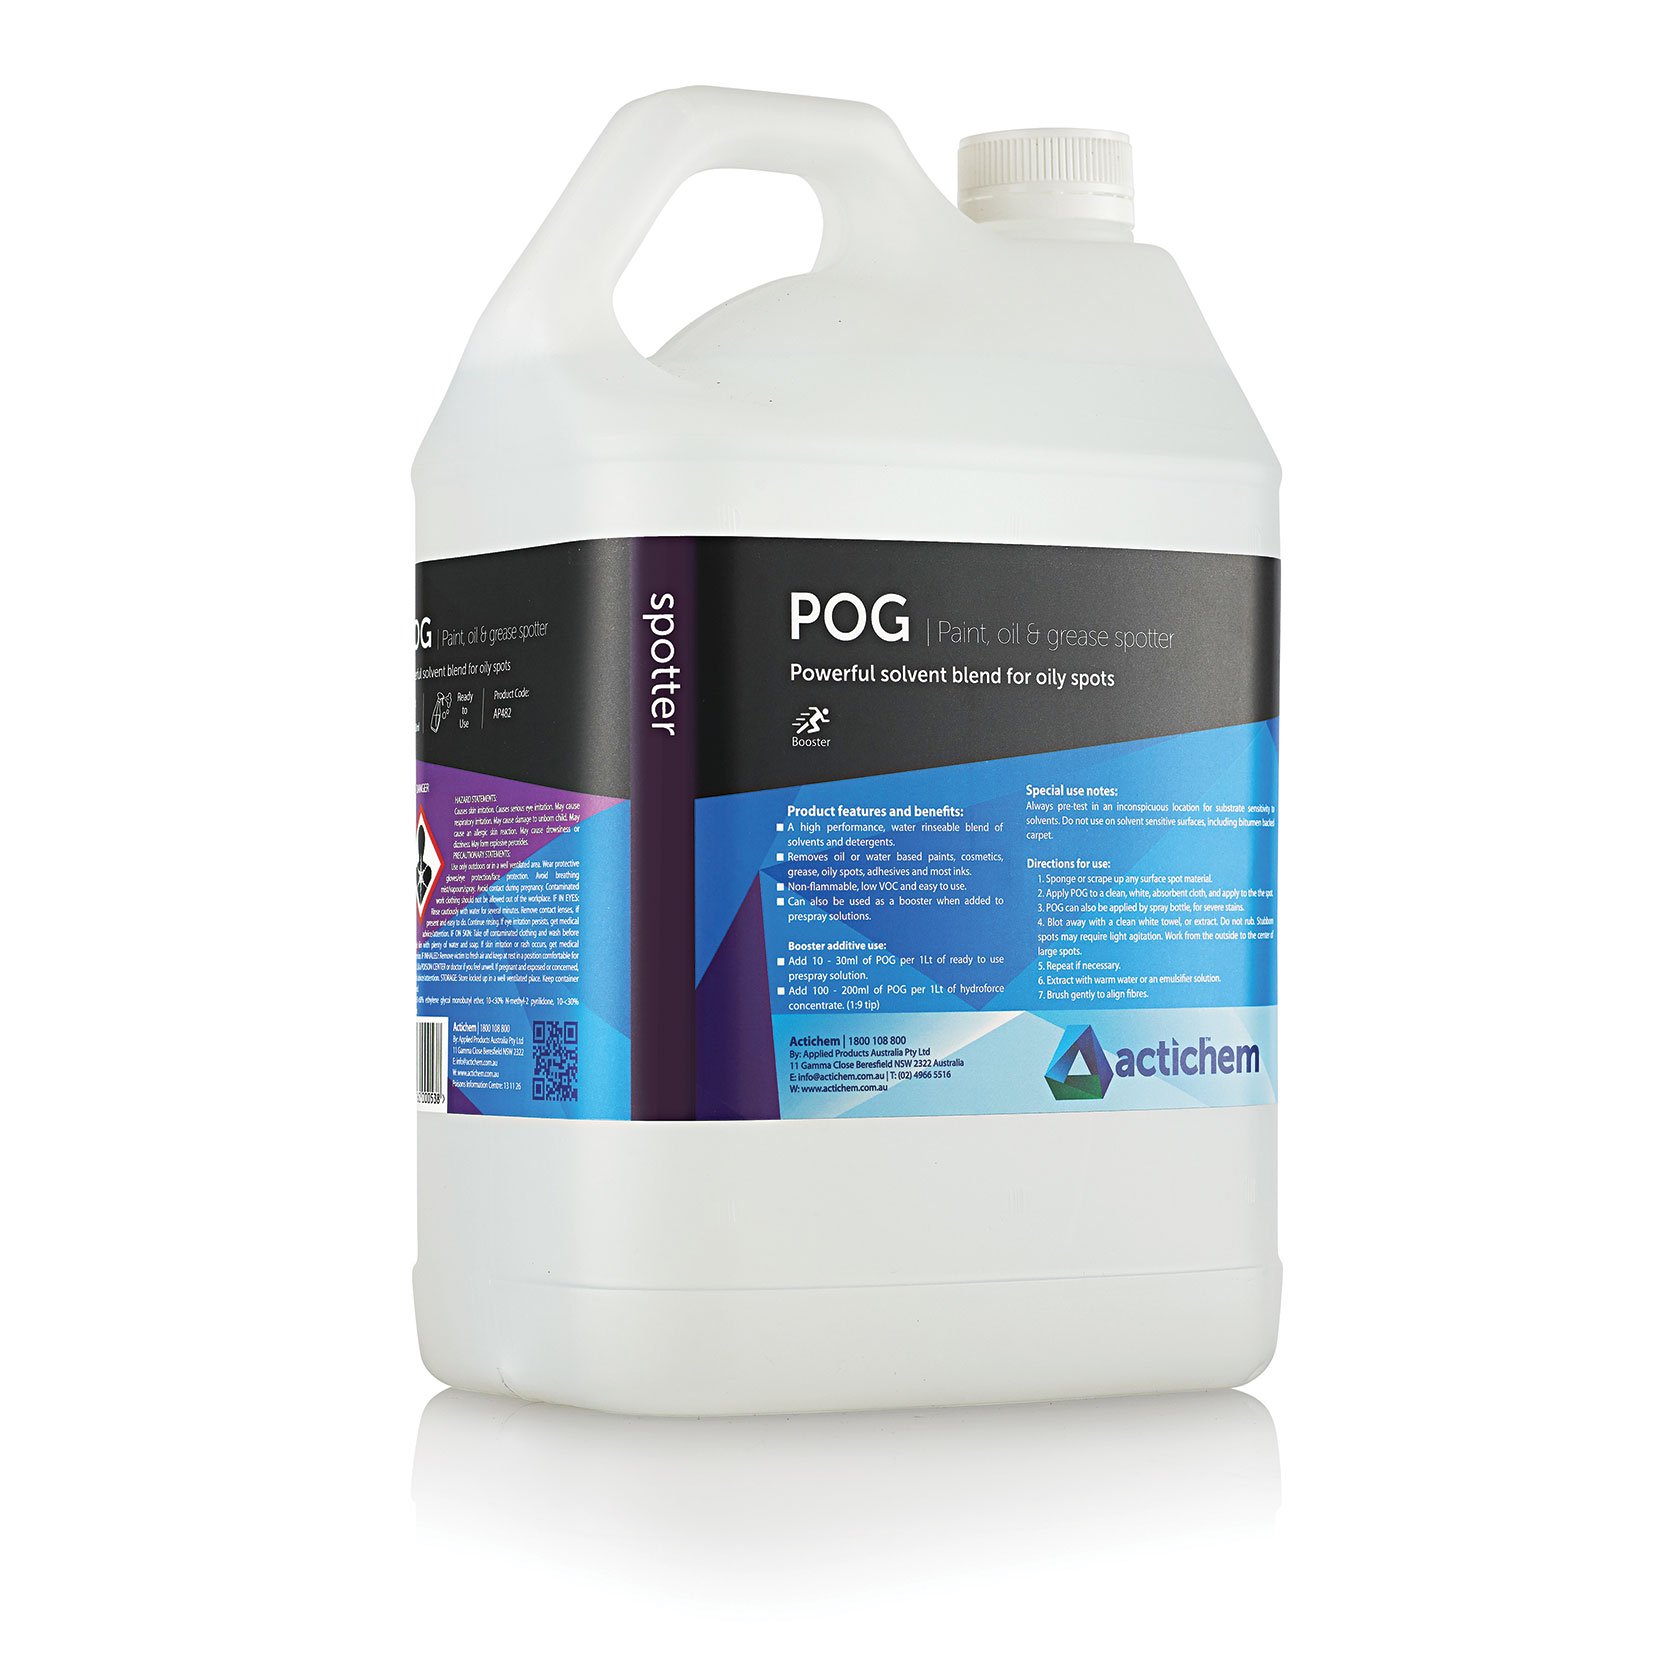 Actichem POG Paint, oil & grease stain remover